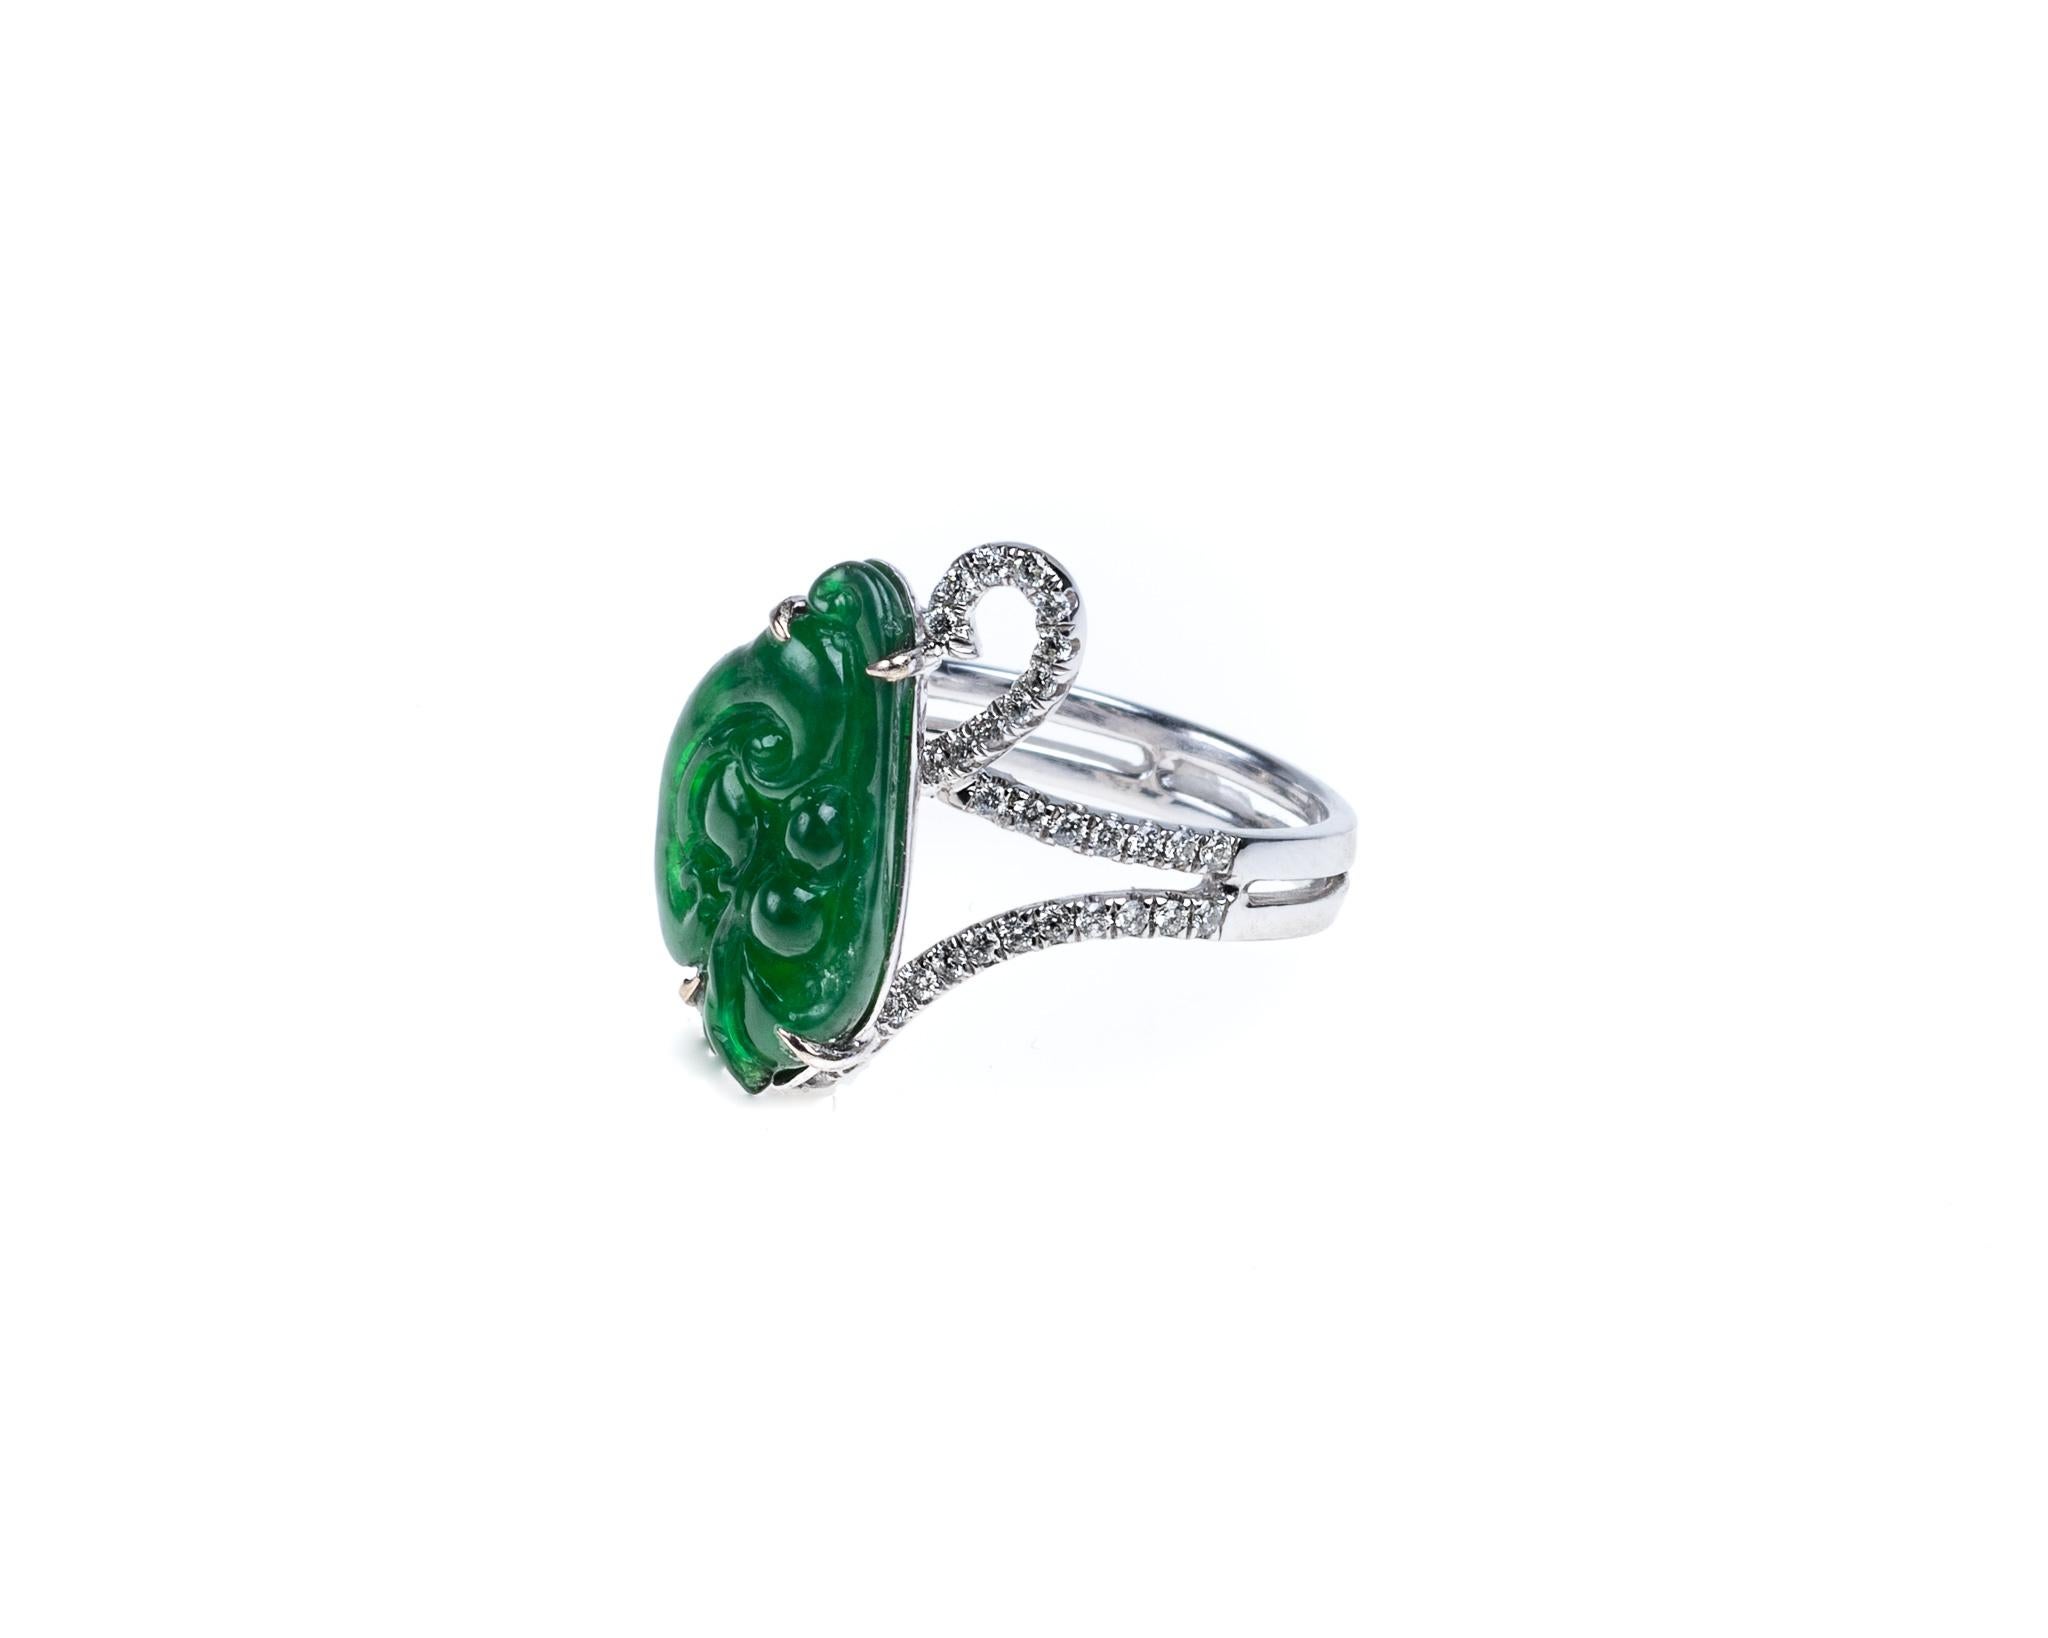 This is all natural, untreated imperial green jadeite jade carved ruyi with round brilliant diamonds totaling 0.41 carats, set in 18K white gold diamond ring.  

it measures 0.38 inches (9.7mm) x 0.70 inches (17.8mm) with thickness of 0.24 inches